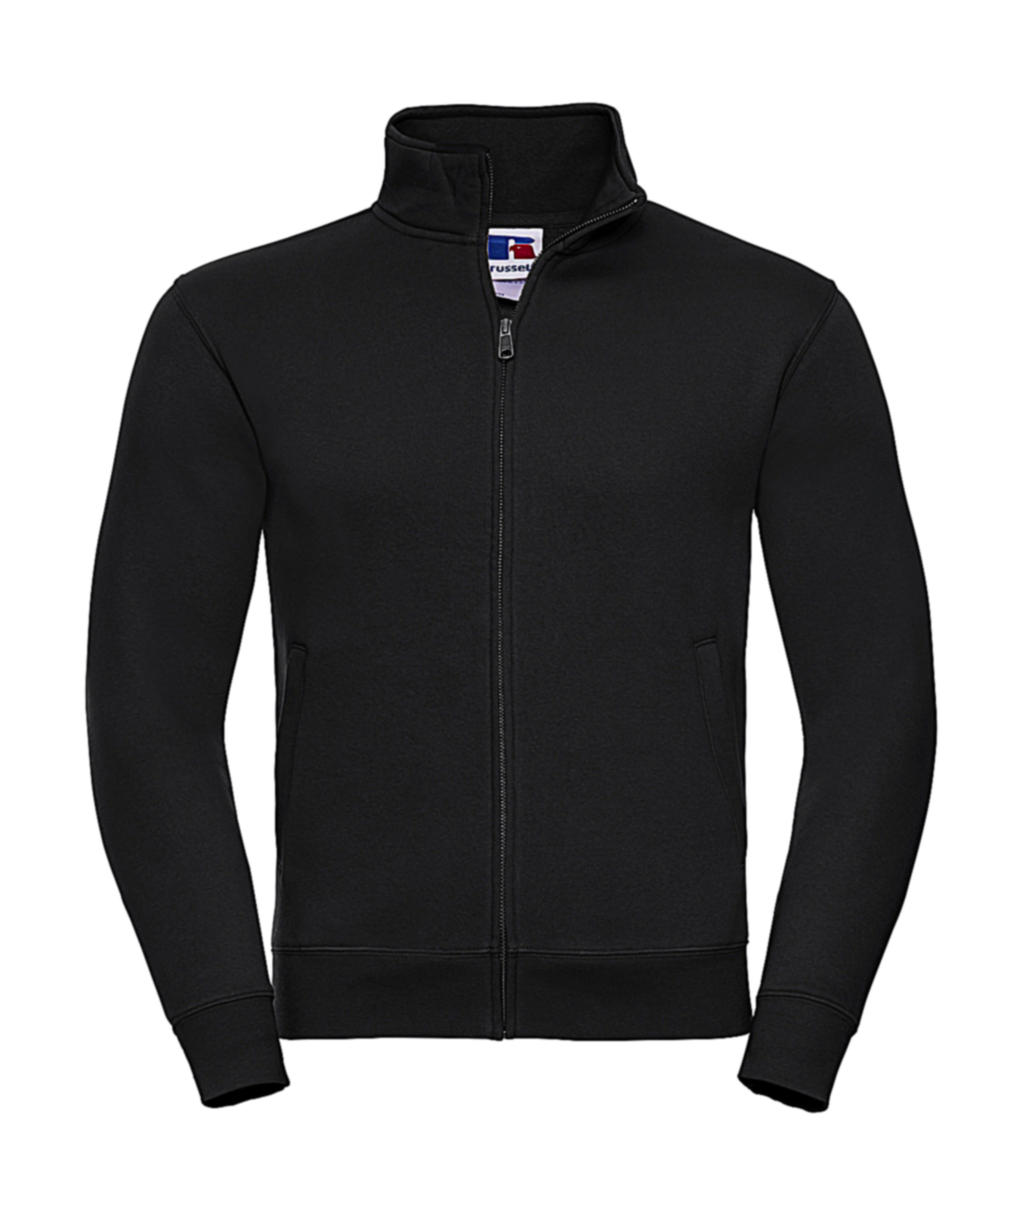  Mens Authentic Sweat Jacket in Farbe Black